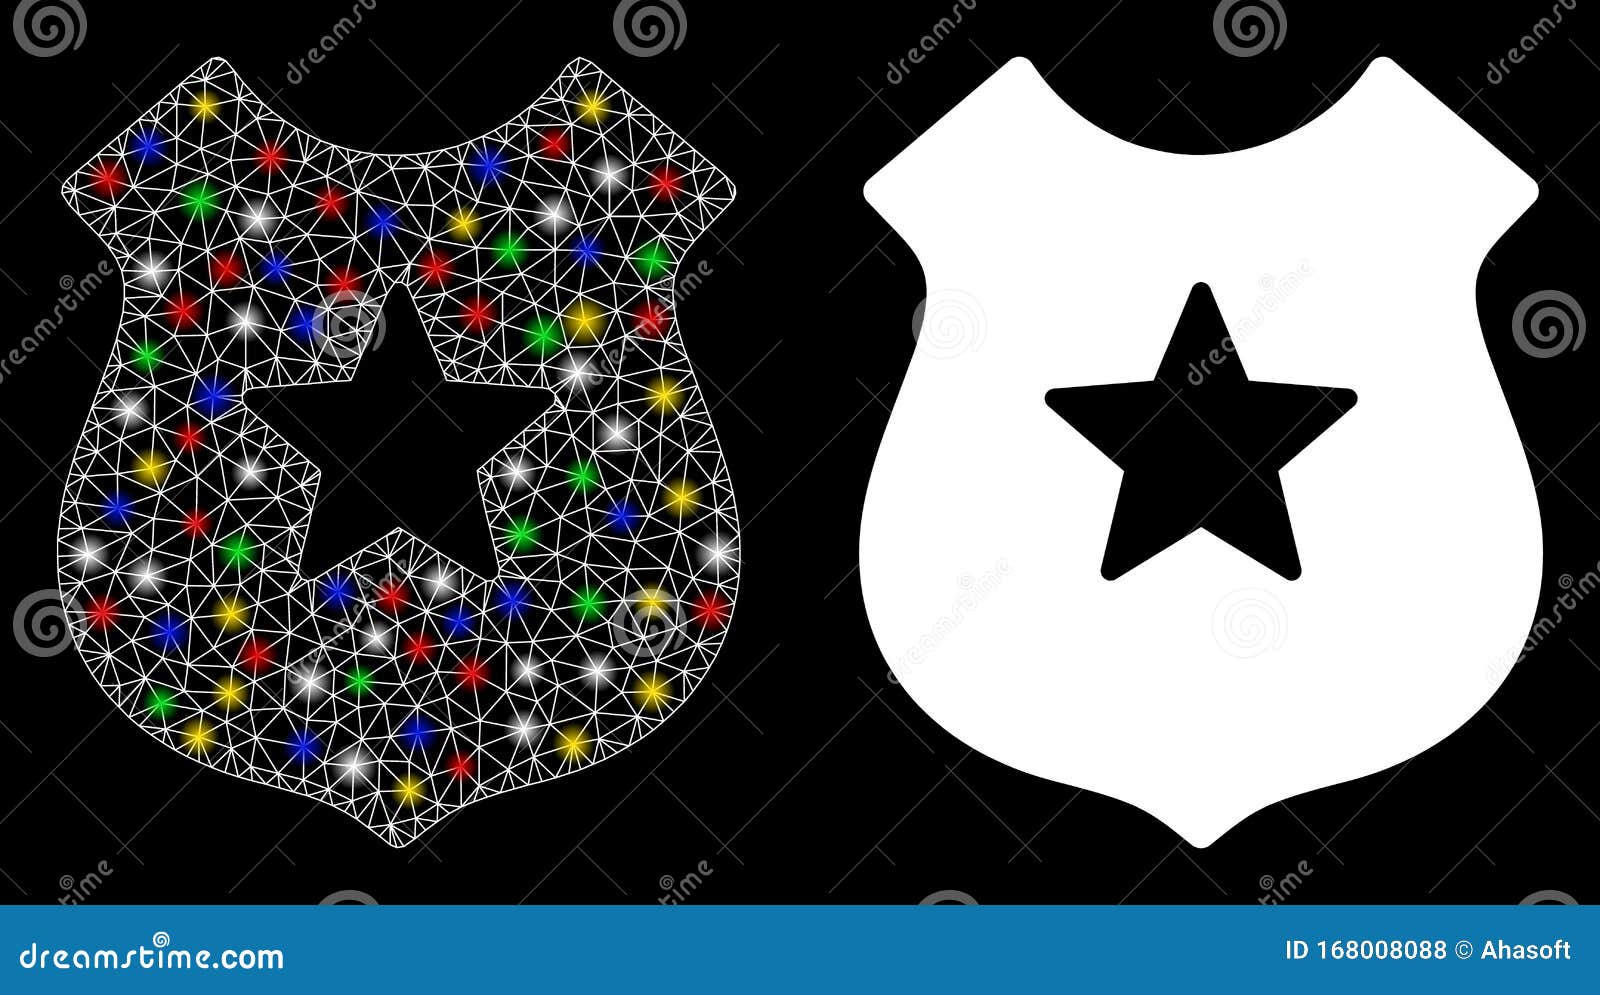 bright mesh 2d police shield icon with flash spots